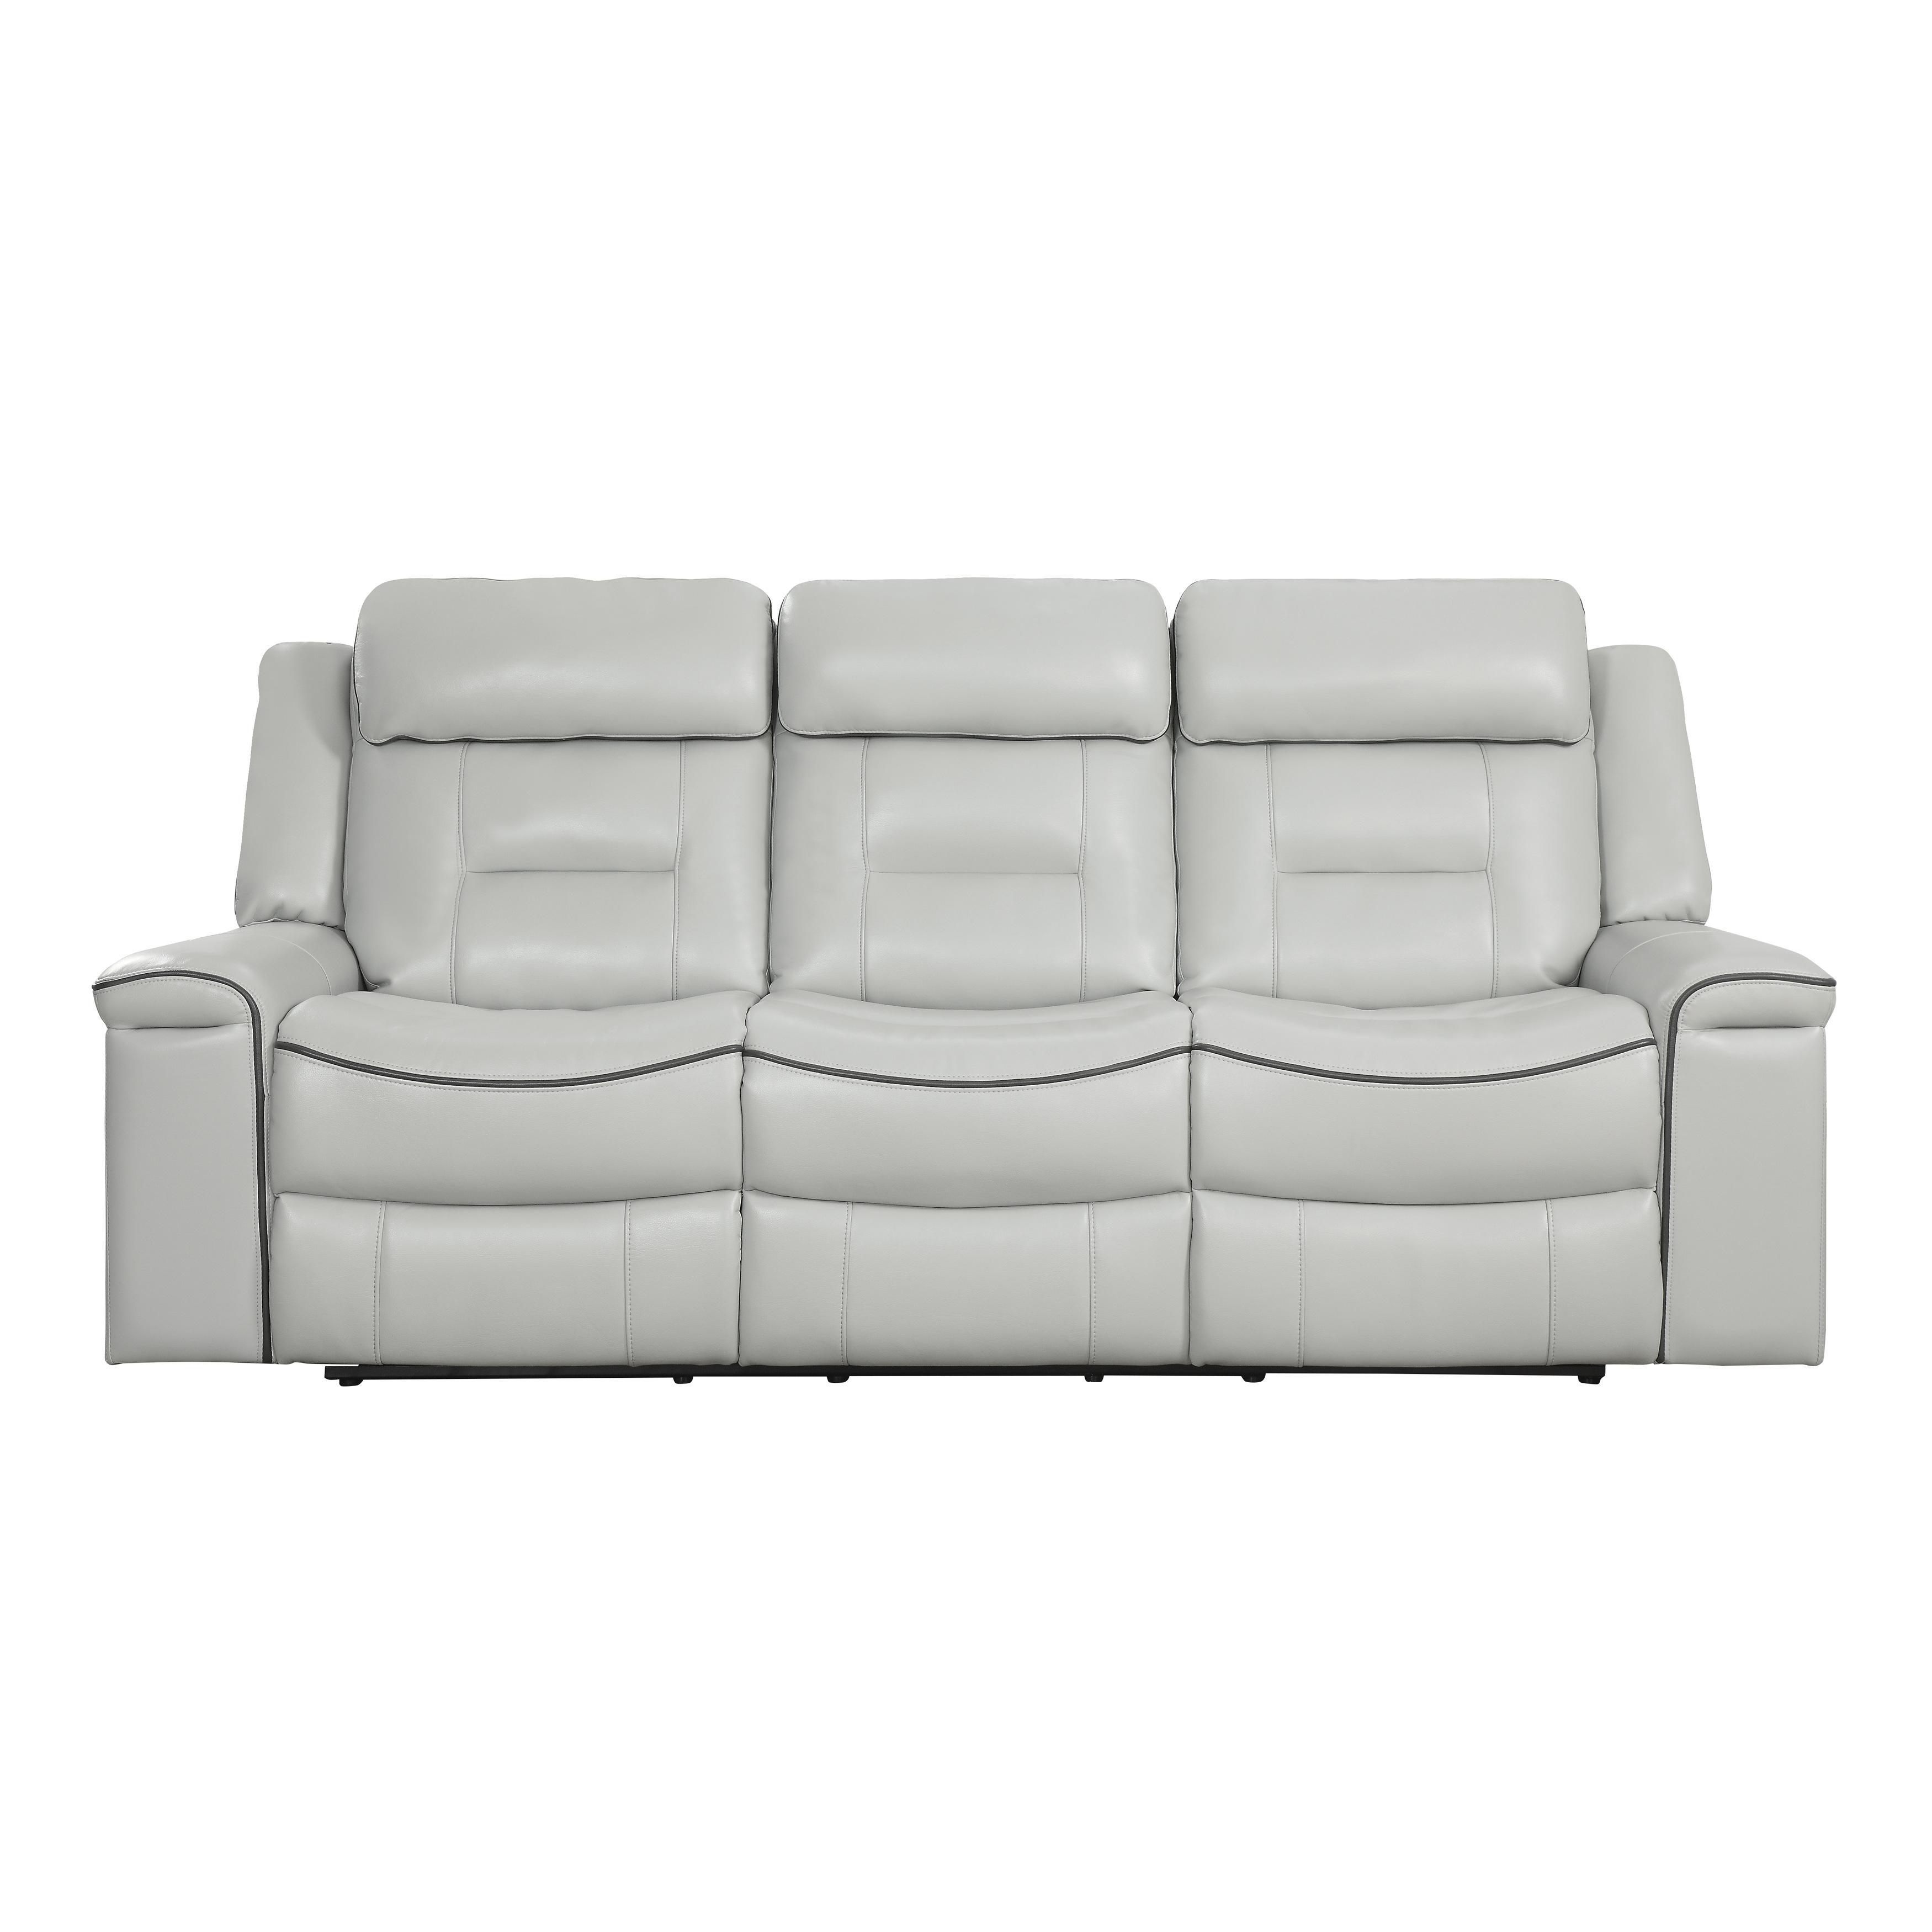 

    
Contemporary Light Gray Faux Leather Reclining Sofa Homelegance 9999GY-3 Darwan
